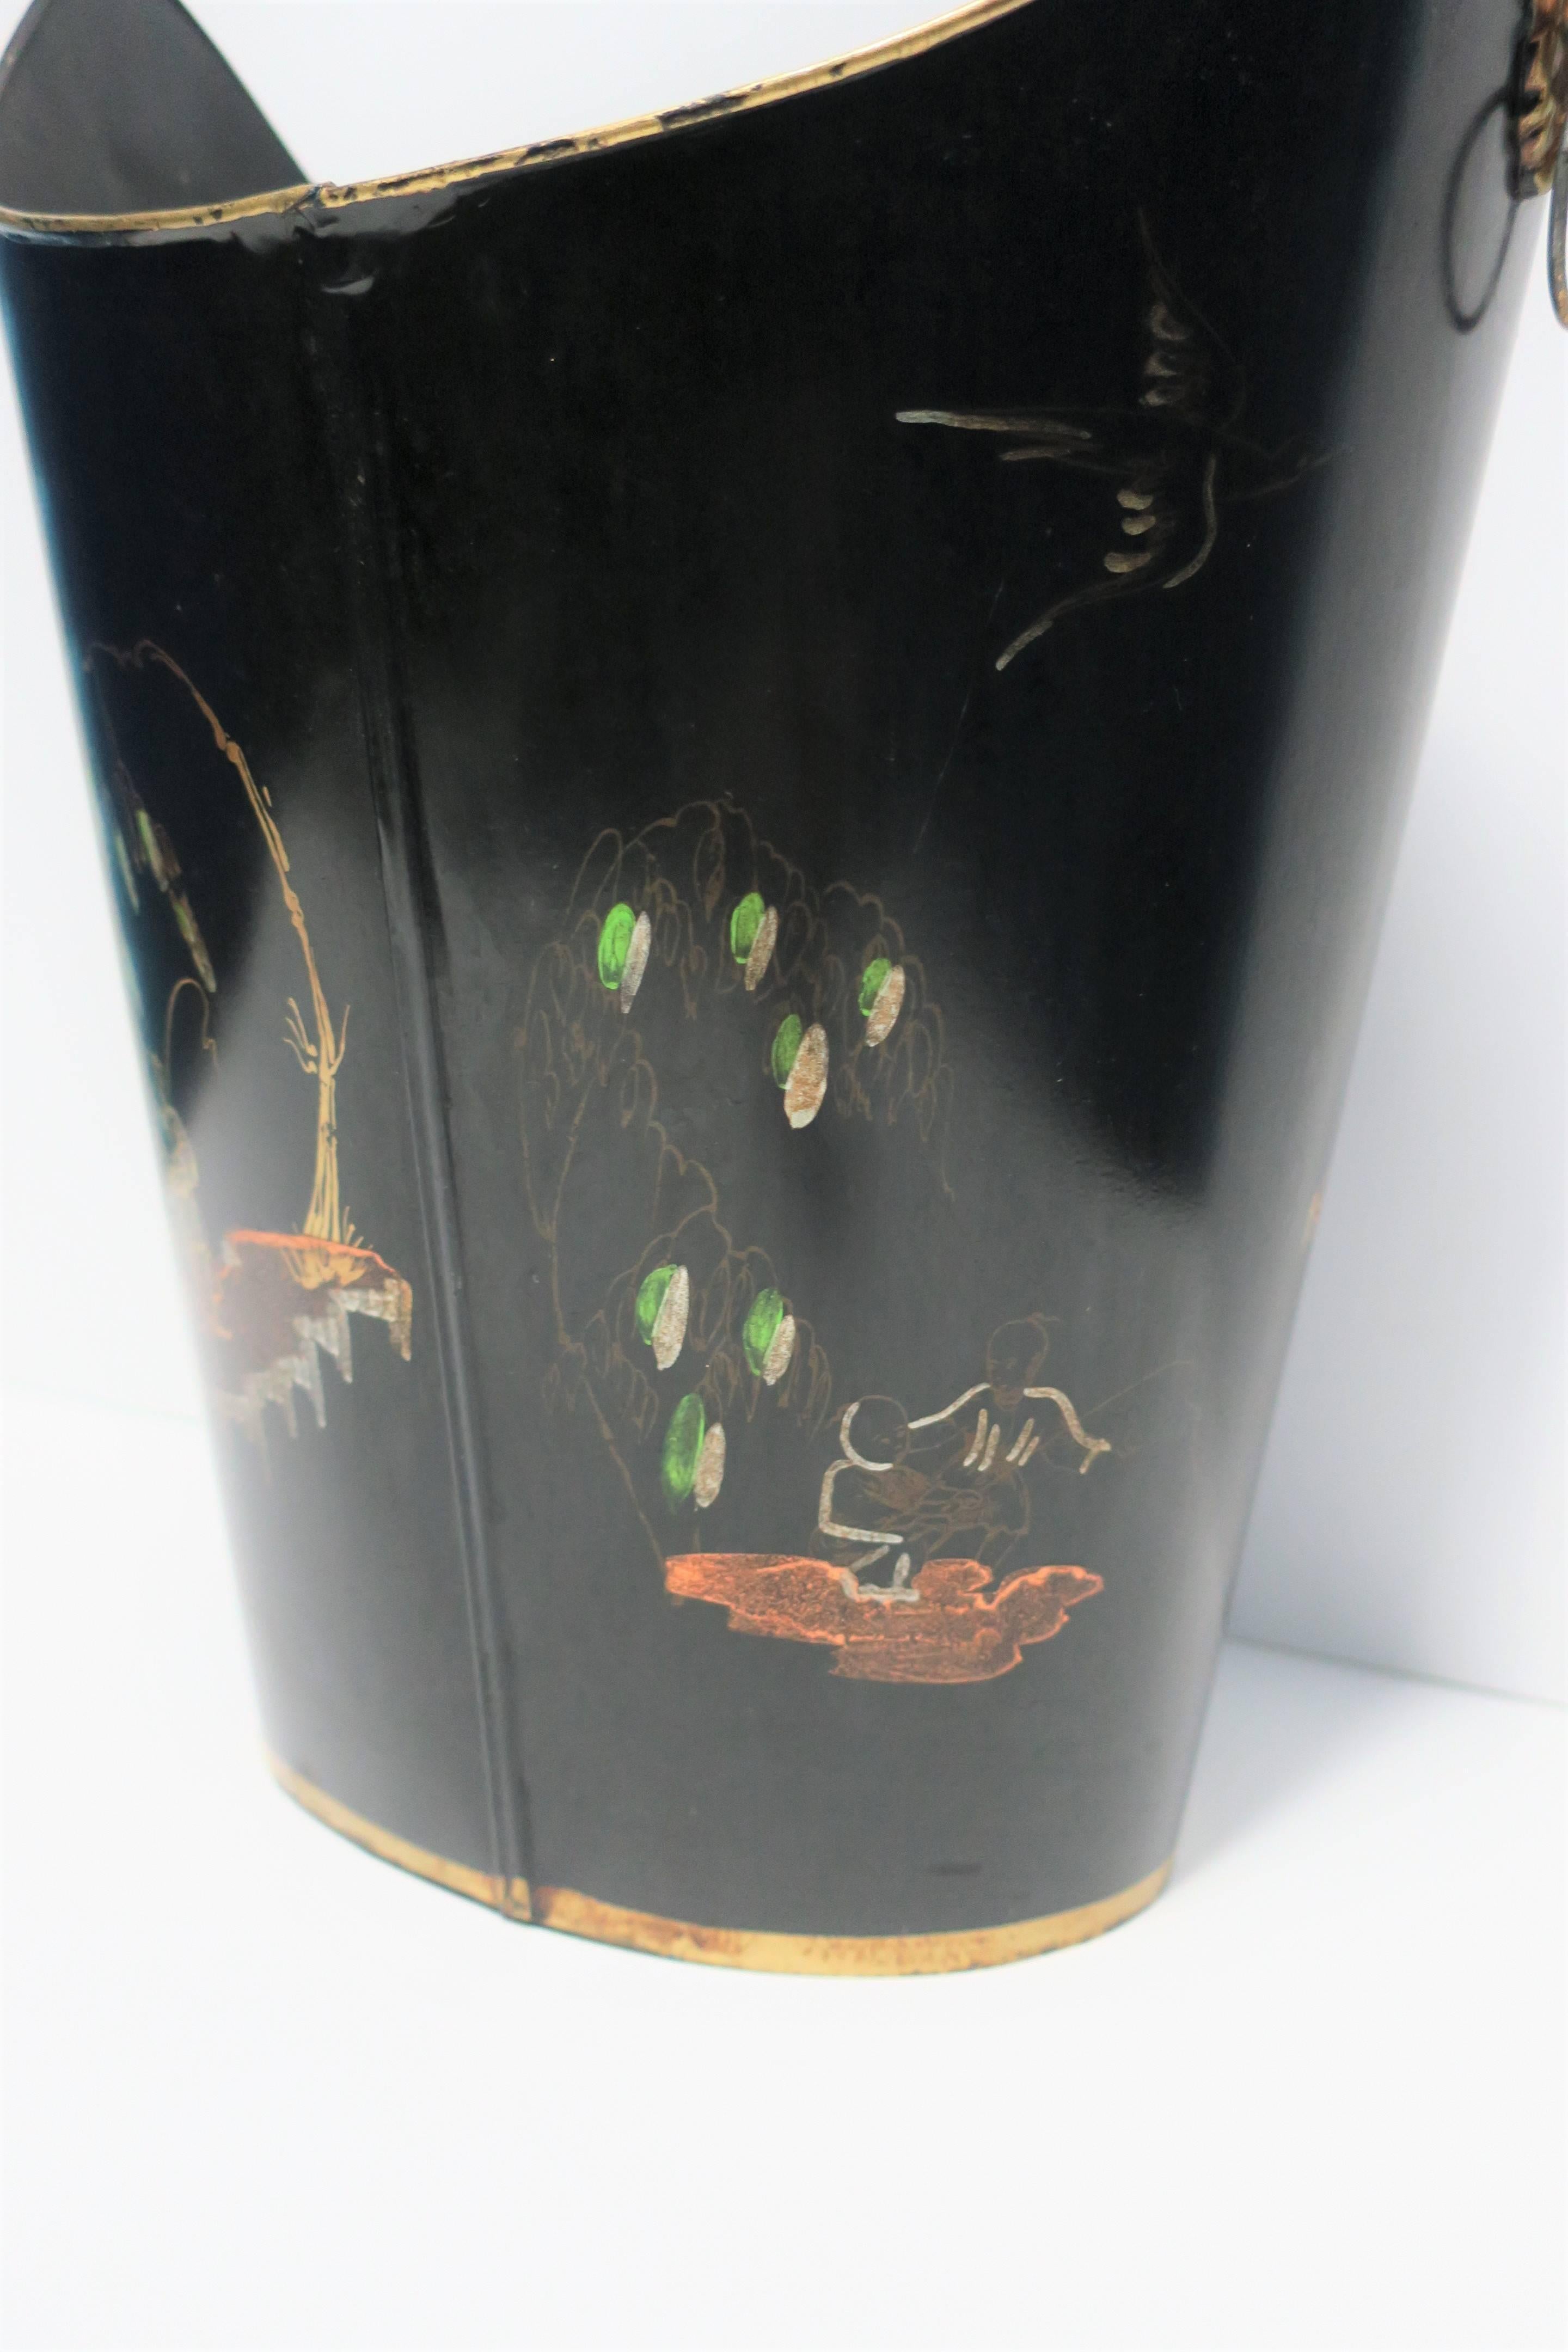 20th Century Italian Black and Gold Wastebasket or Trash Can